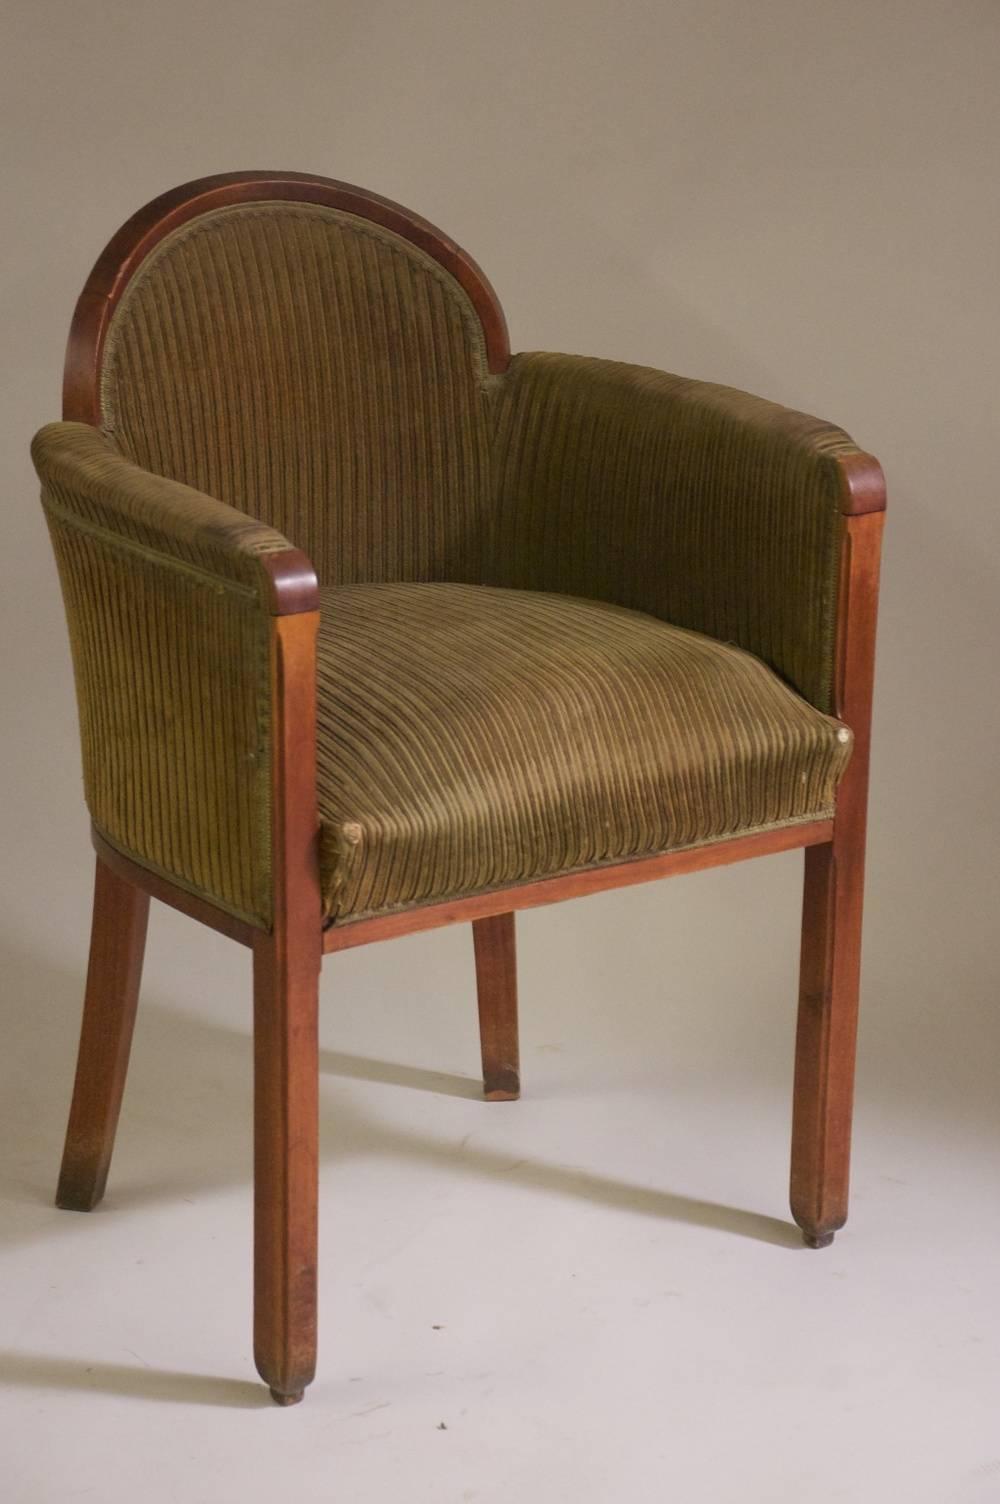 Classic French Art Deco low-backed armchairs. Two pairs available by Paul Follot circa 1927 in sculpted mahogany. Documented.

Please note that these chairs are unrestored in the photographs.

Priced per pair.
 